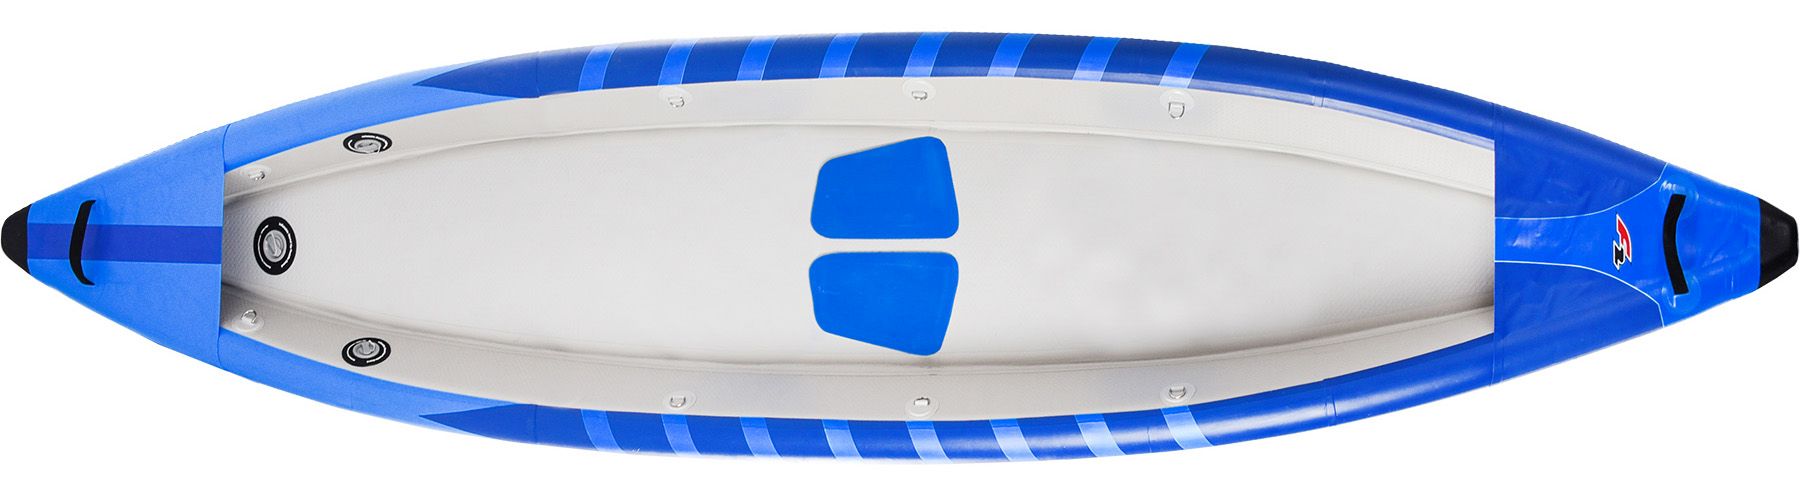 F2 Inflatable Kayak 1-Seater 2022 “open”